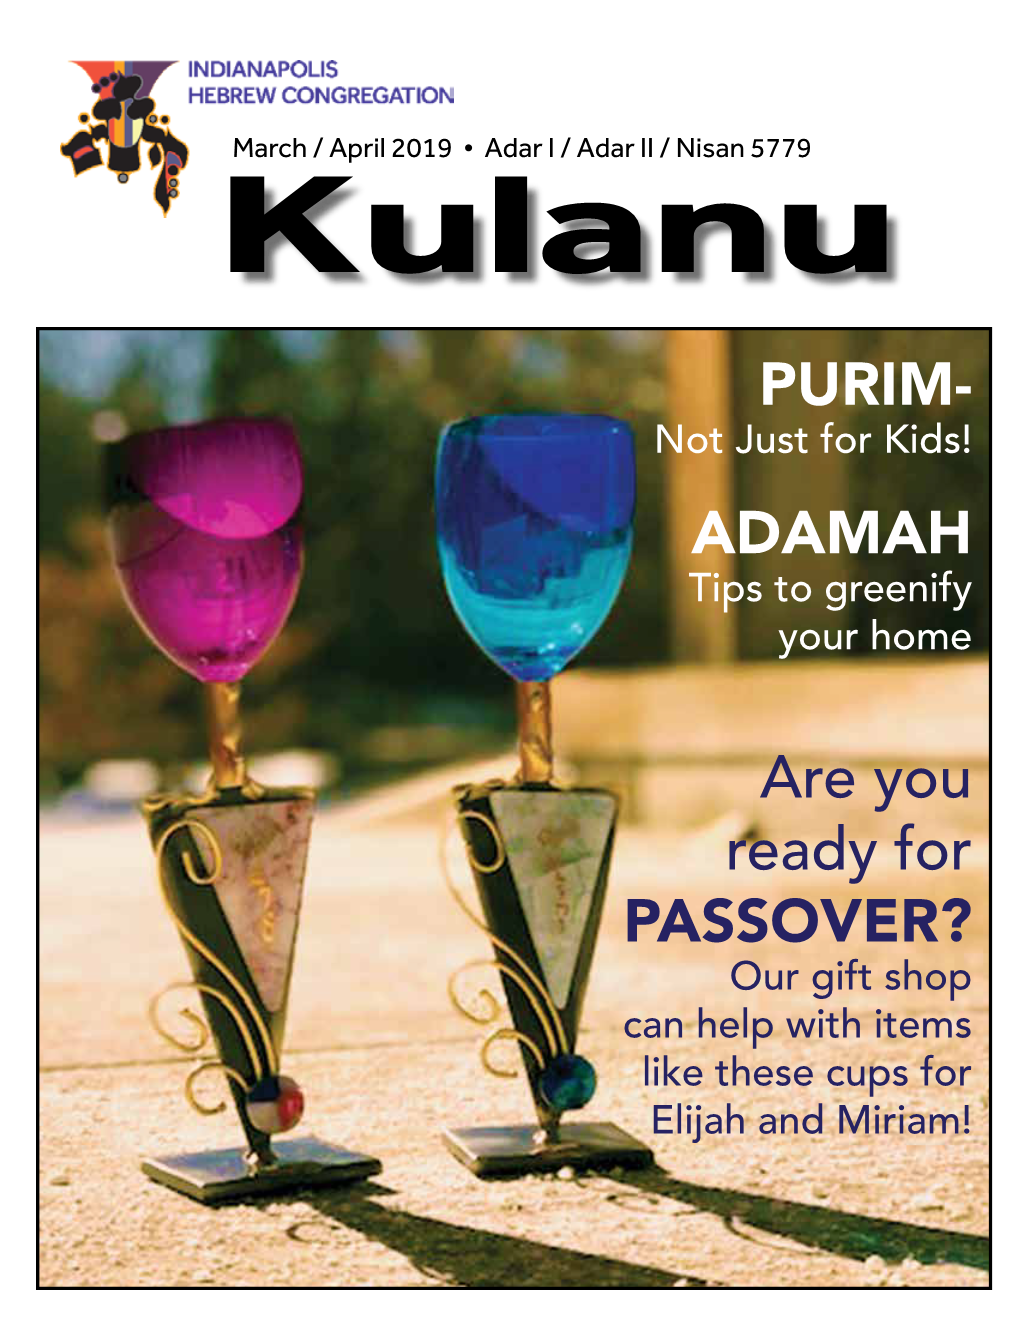 PURIM- Not Just for Kids! ADAMAH Tips to Greenify Your Home